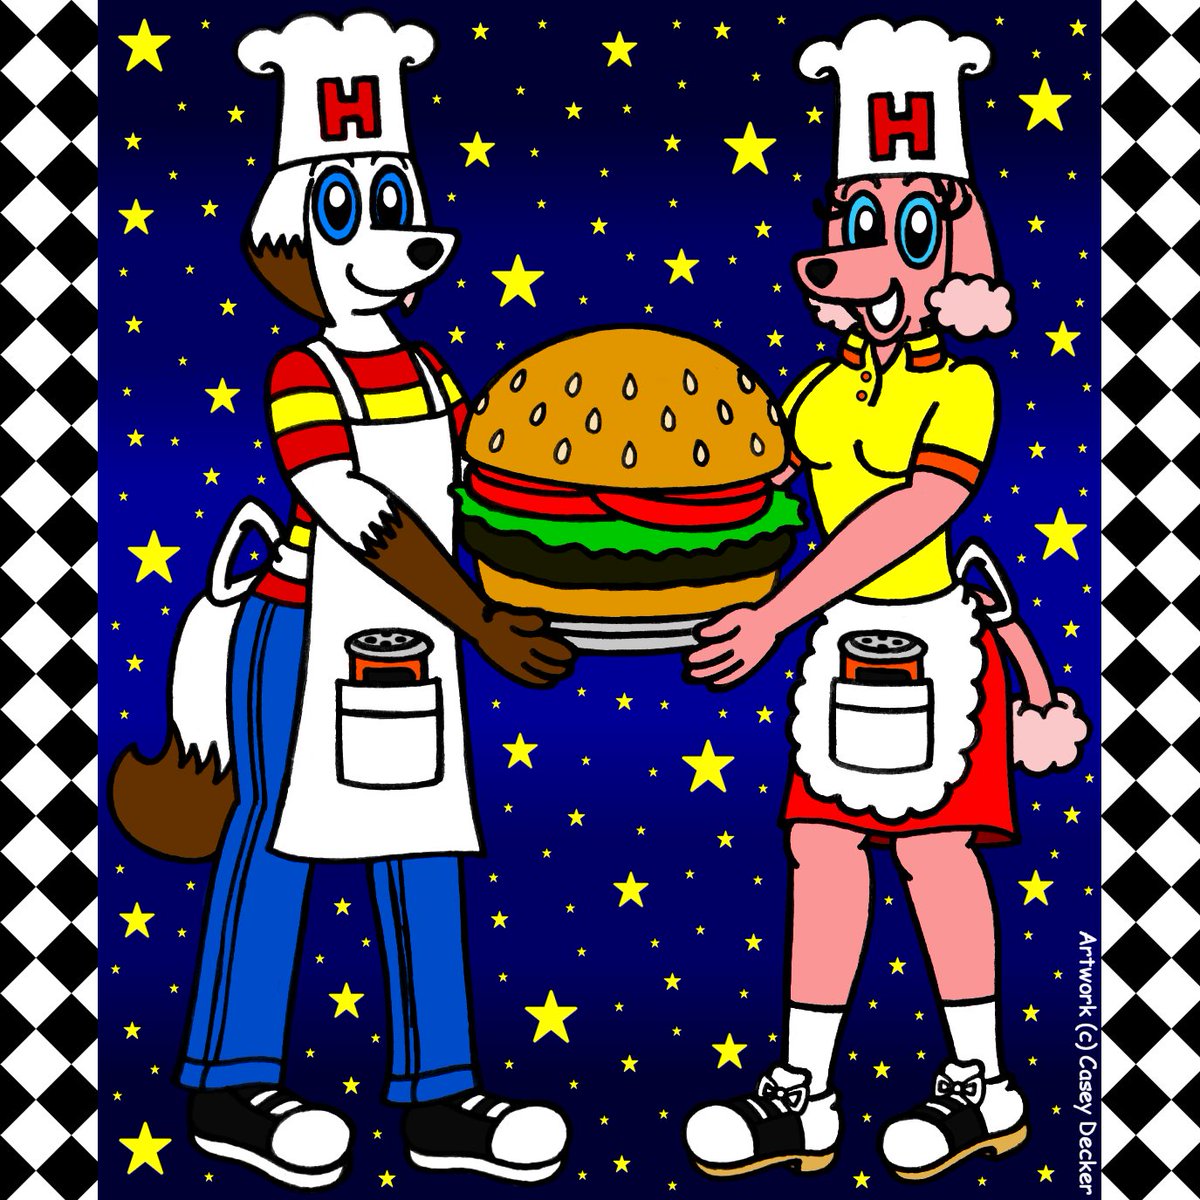 Today happens to be International Hamburger Day, and I was able to draw a picture of Peter Pepper and Paula Paprika from my own version of the classic arcade game 'BurgerTime'. Enjoy! 😉🍔 #Anthro #Furry #AnthroArt #FurryArt #BurgerTime #InternationalHamburgerDay